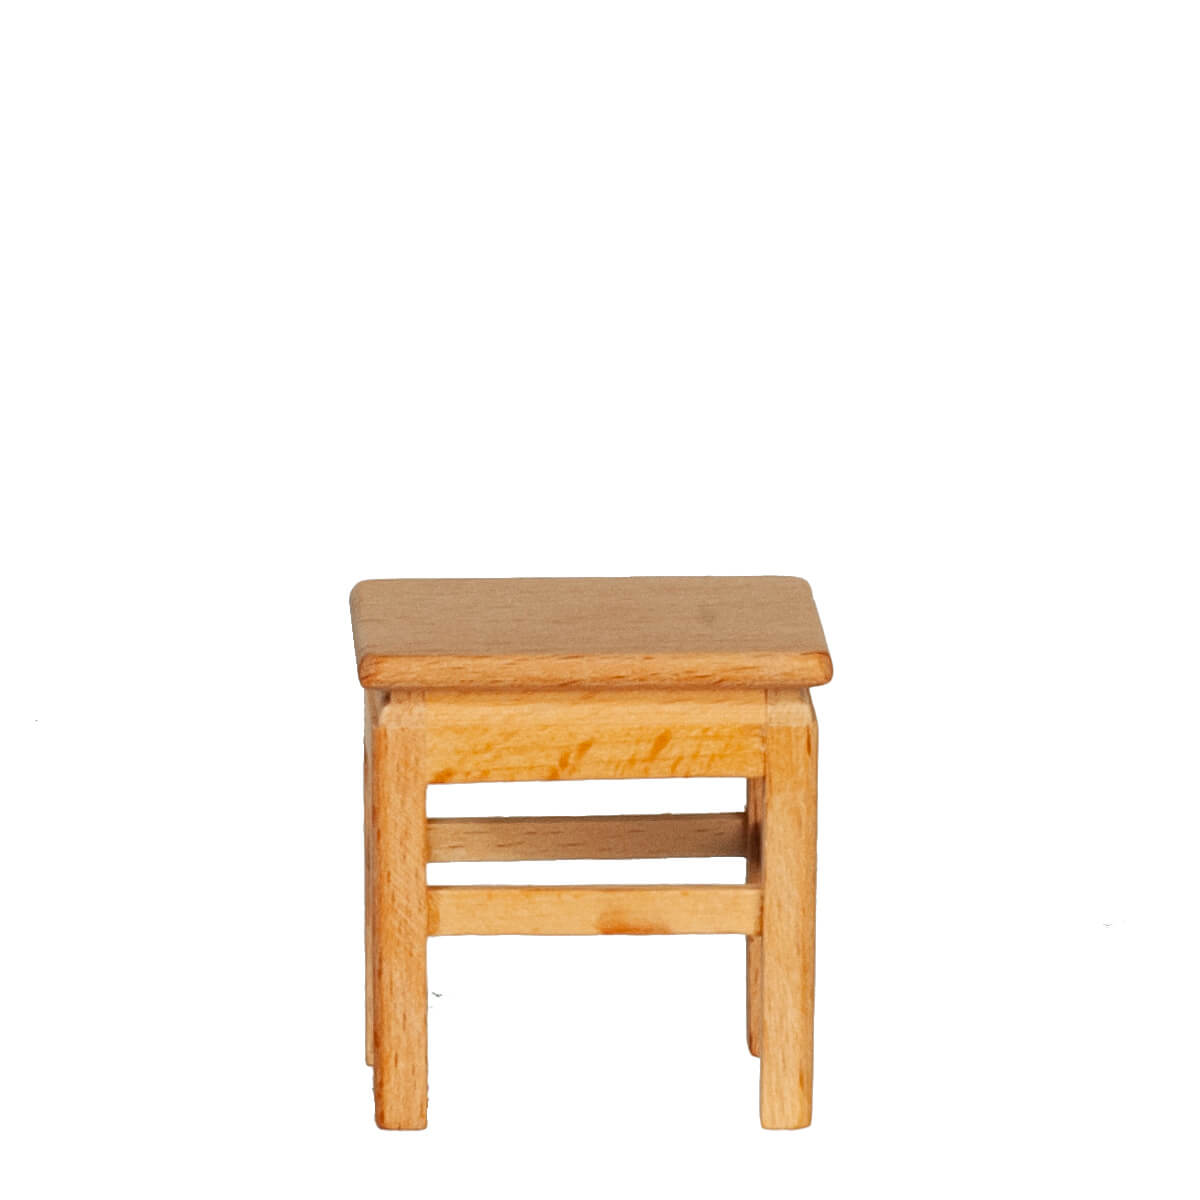 Low Stool - Unfinished